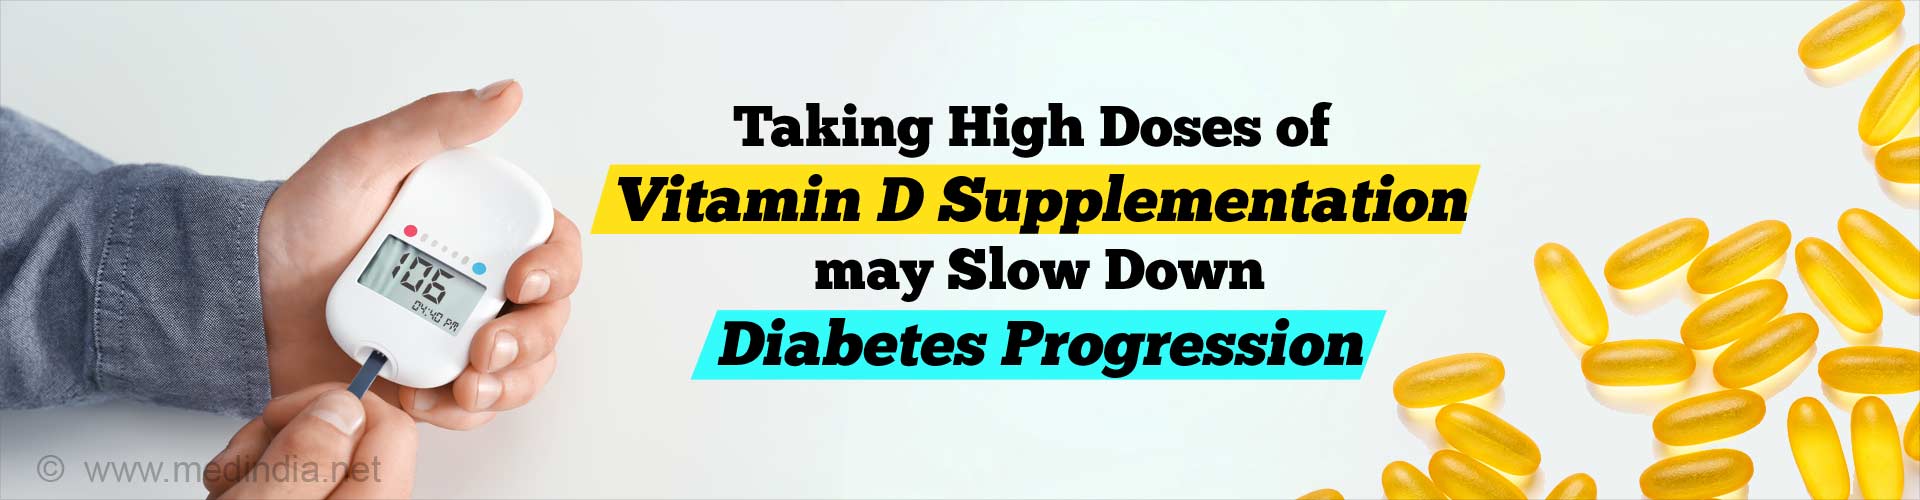 Taking high doses of vitamin D supplementation may slow down diabetes progression.